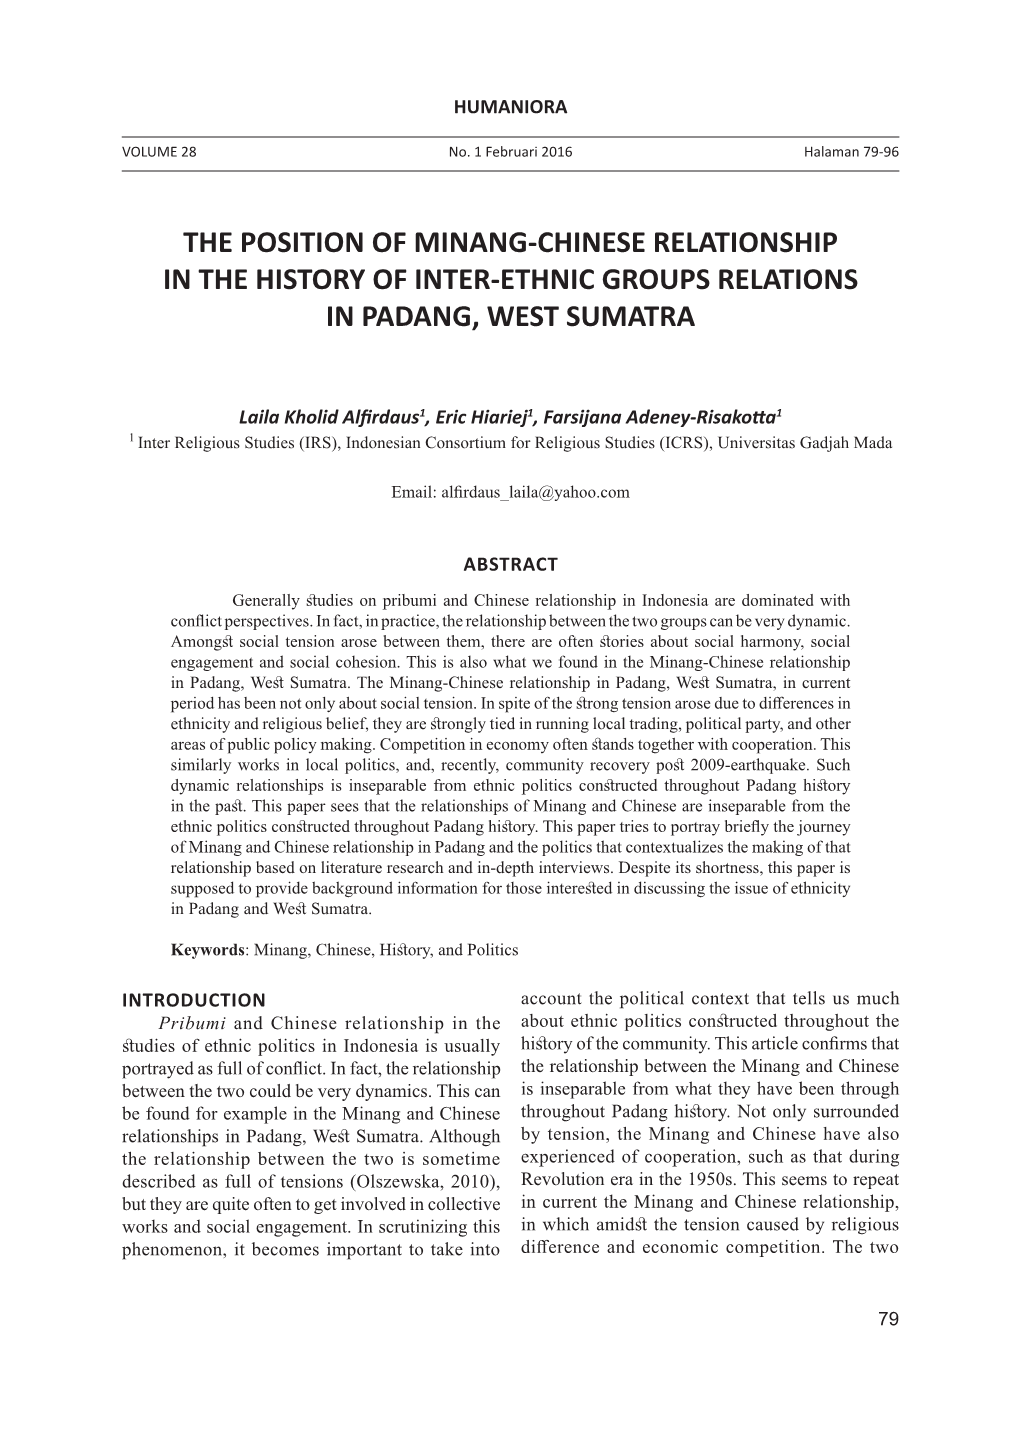 The Position of Minang-Chinese Relationship in the History of Inter-Ethnic Groups Relations in Padang, West Sumatra